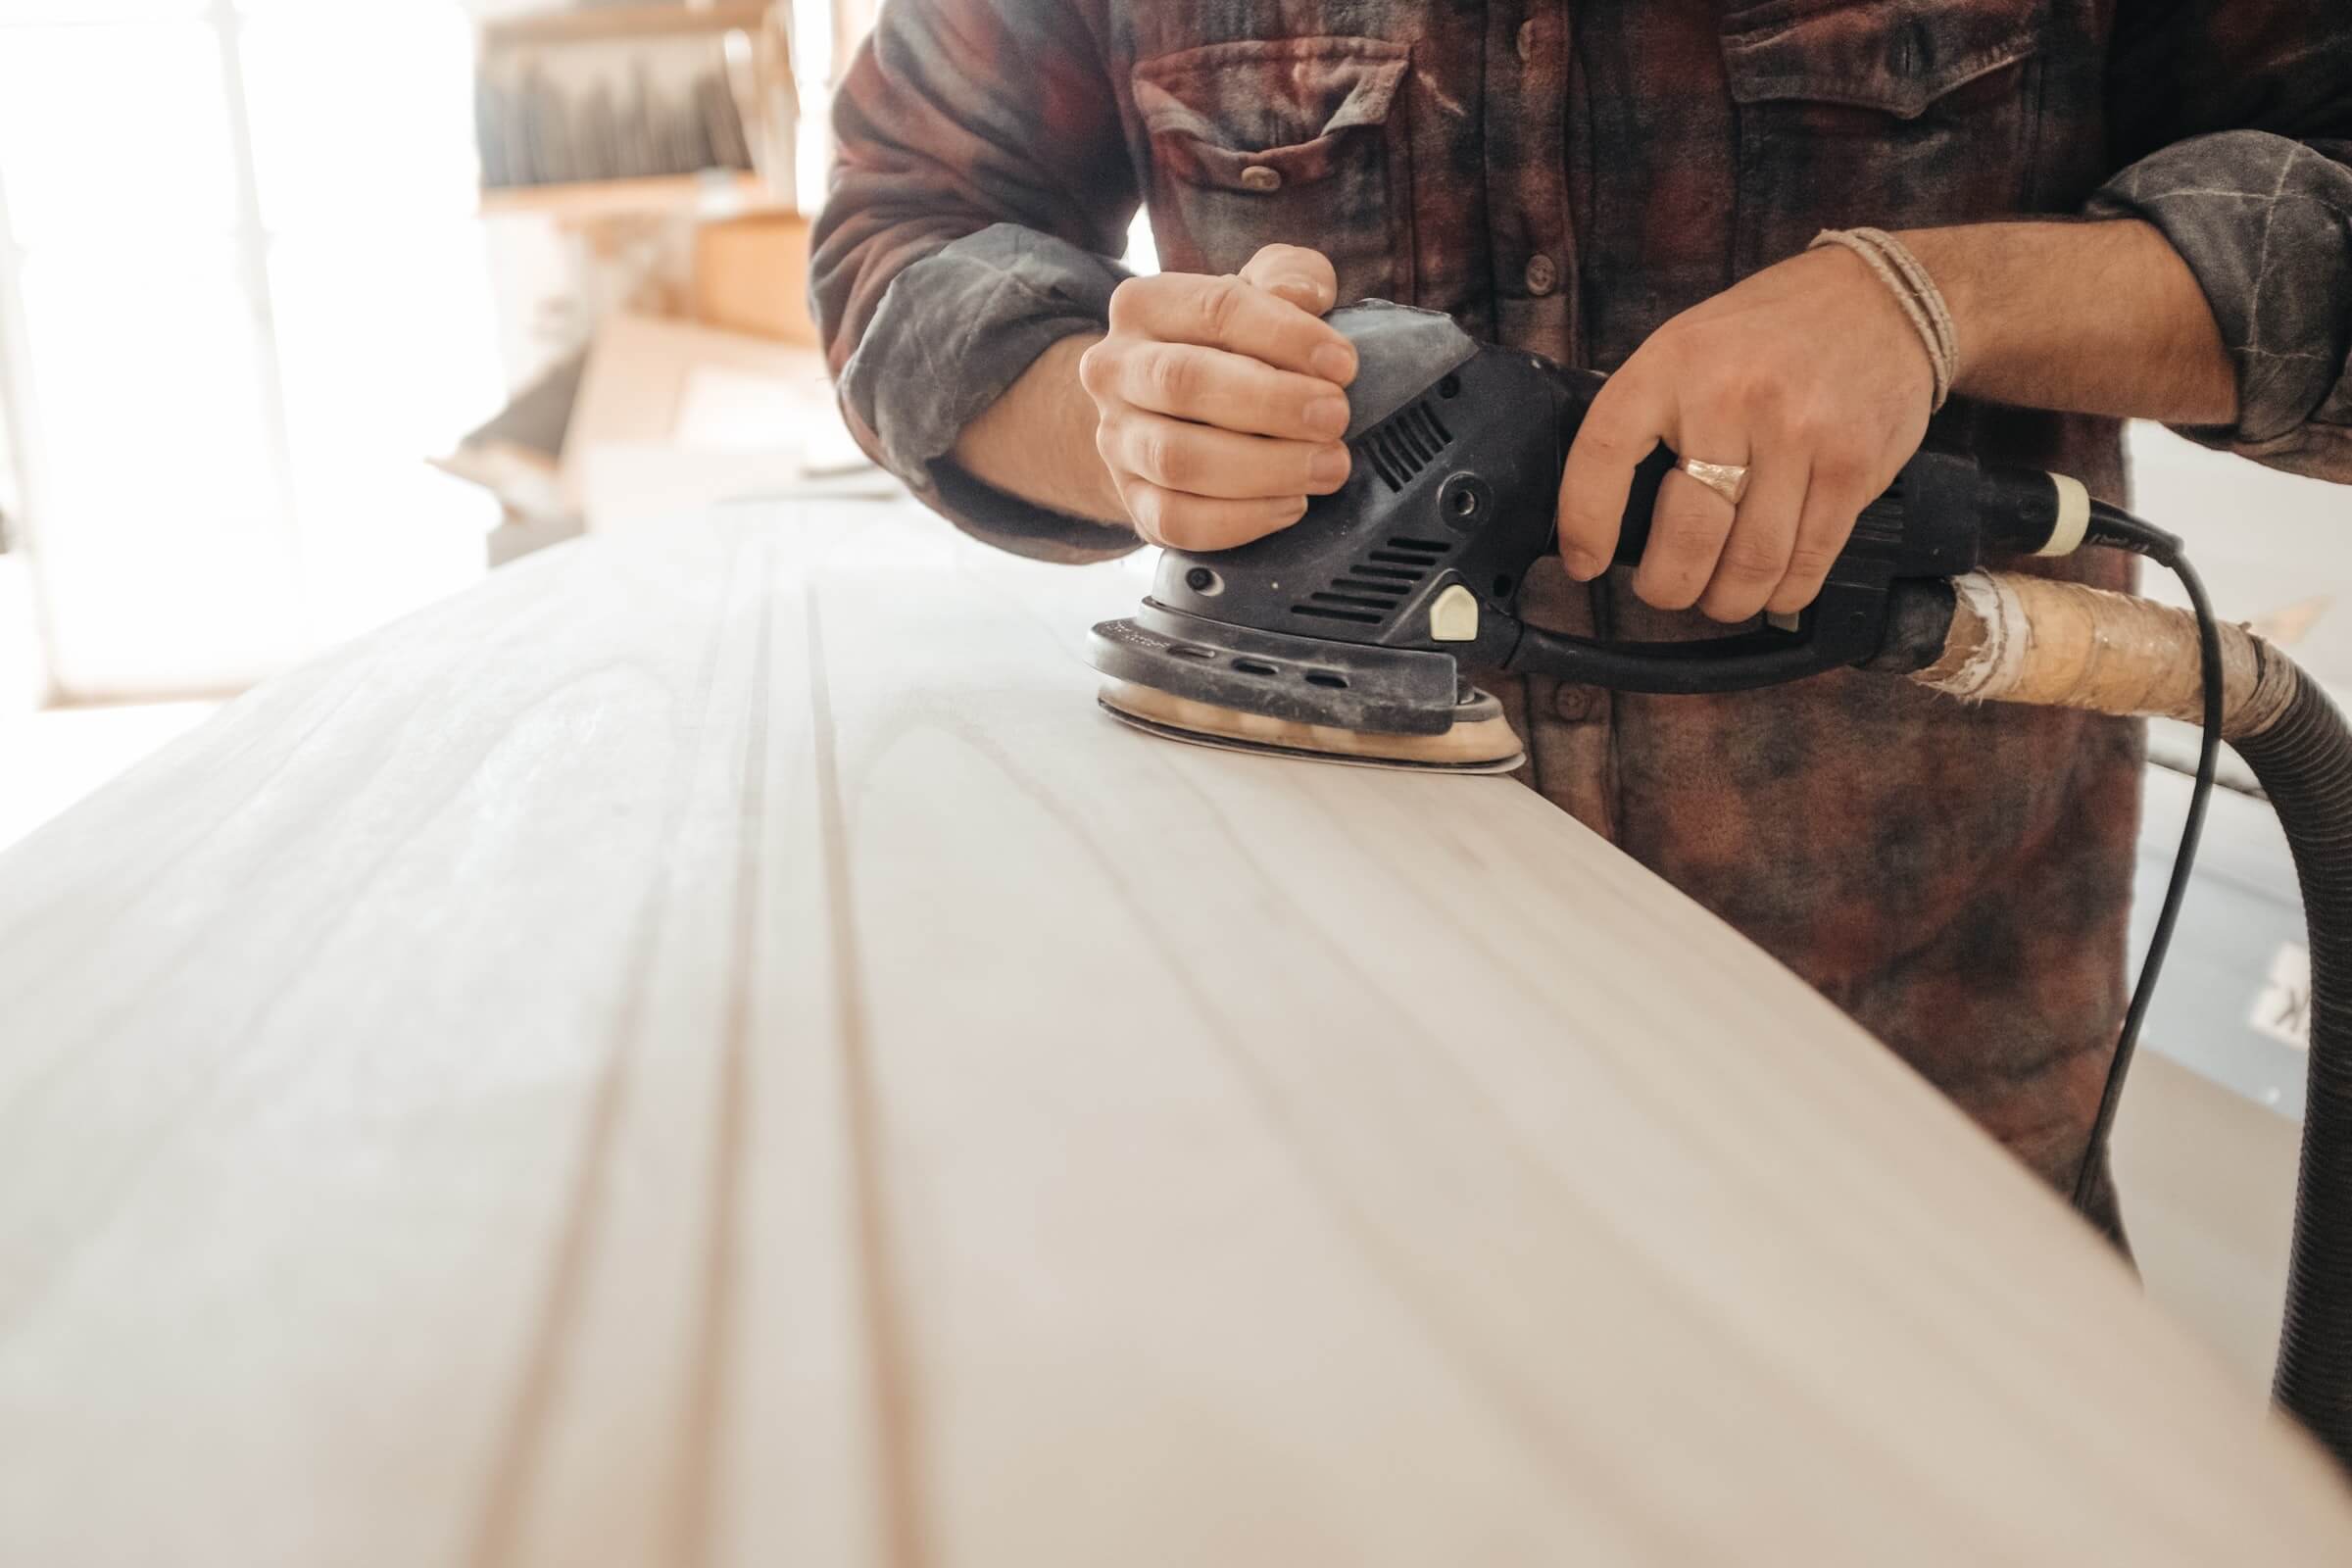 image of man working on wood